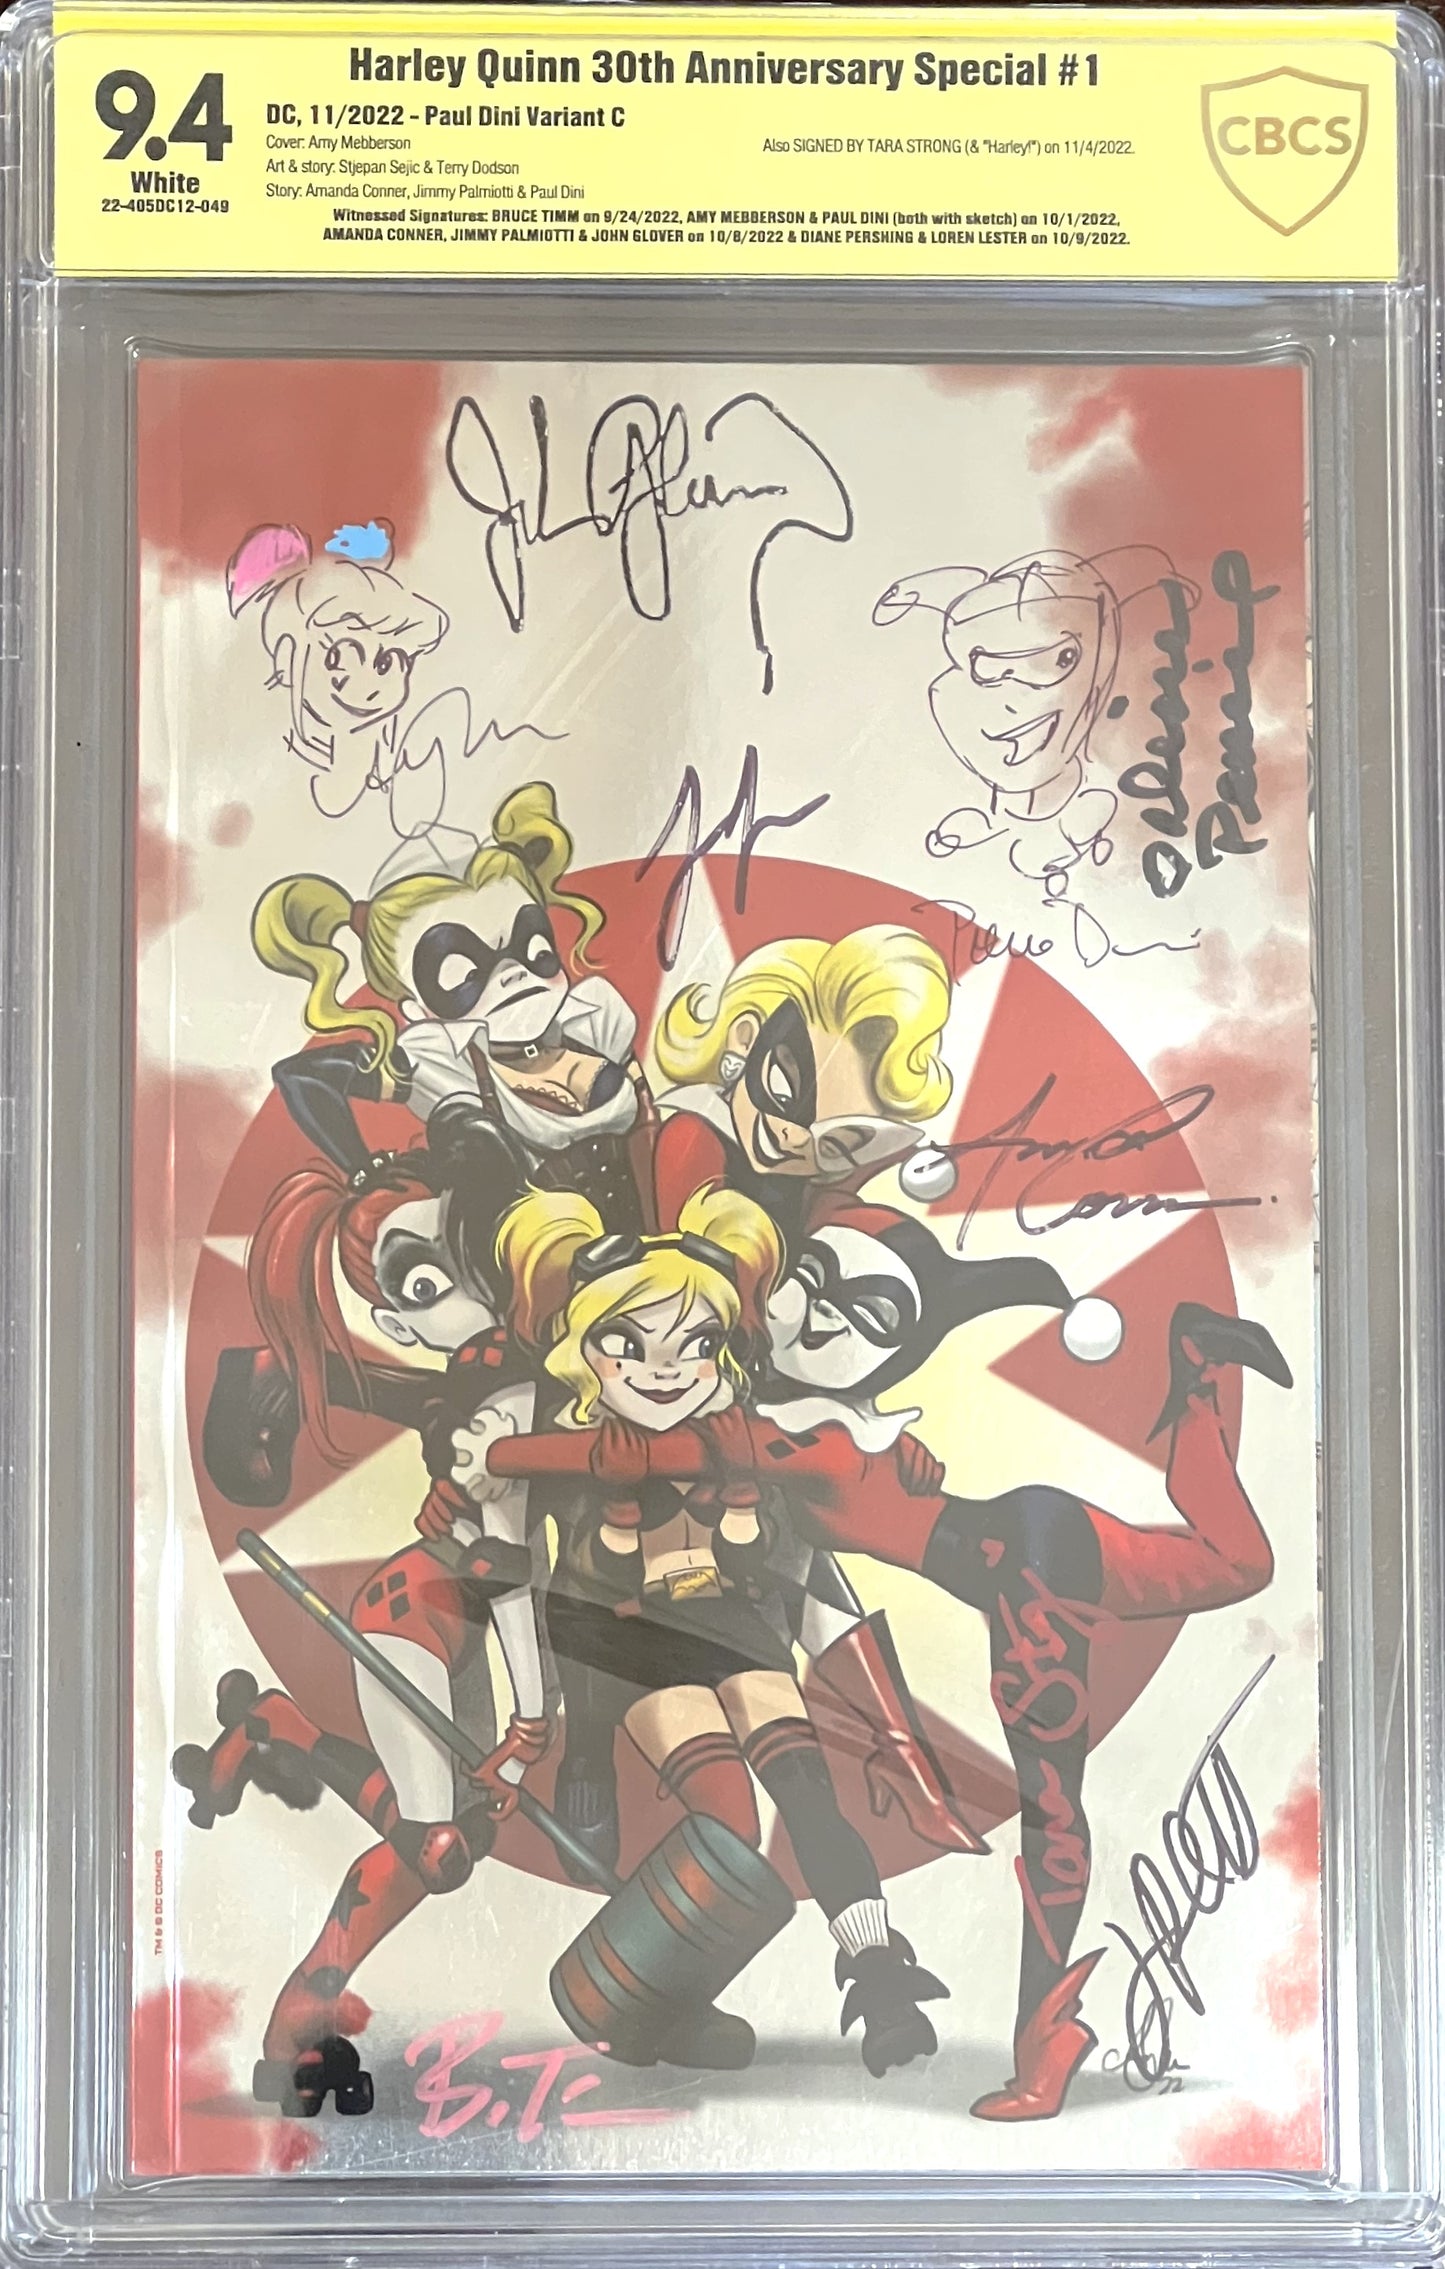 Harley Quinn 30th Anniversary Special #1. Paul Dini Variant. CBCS 9.4.